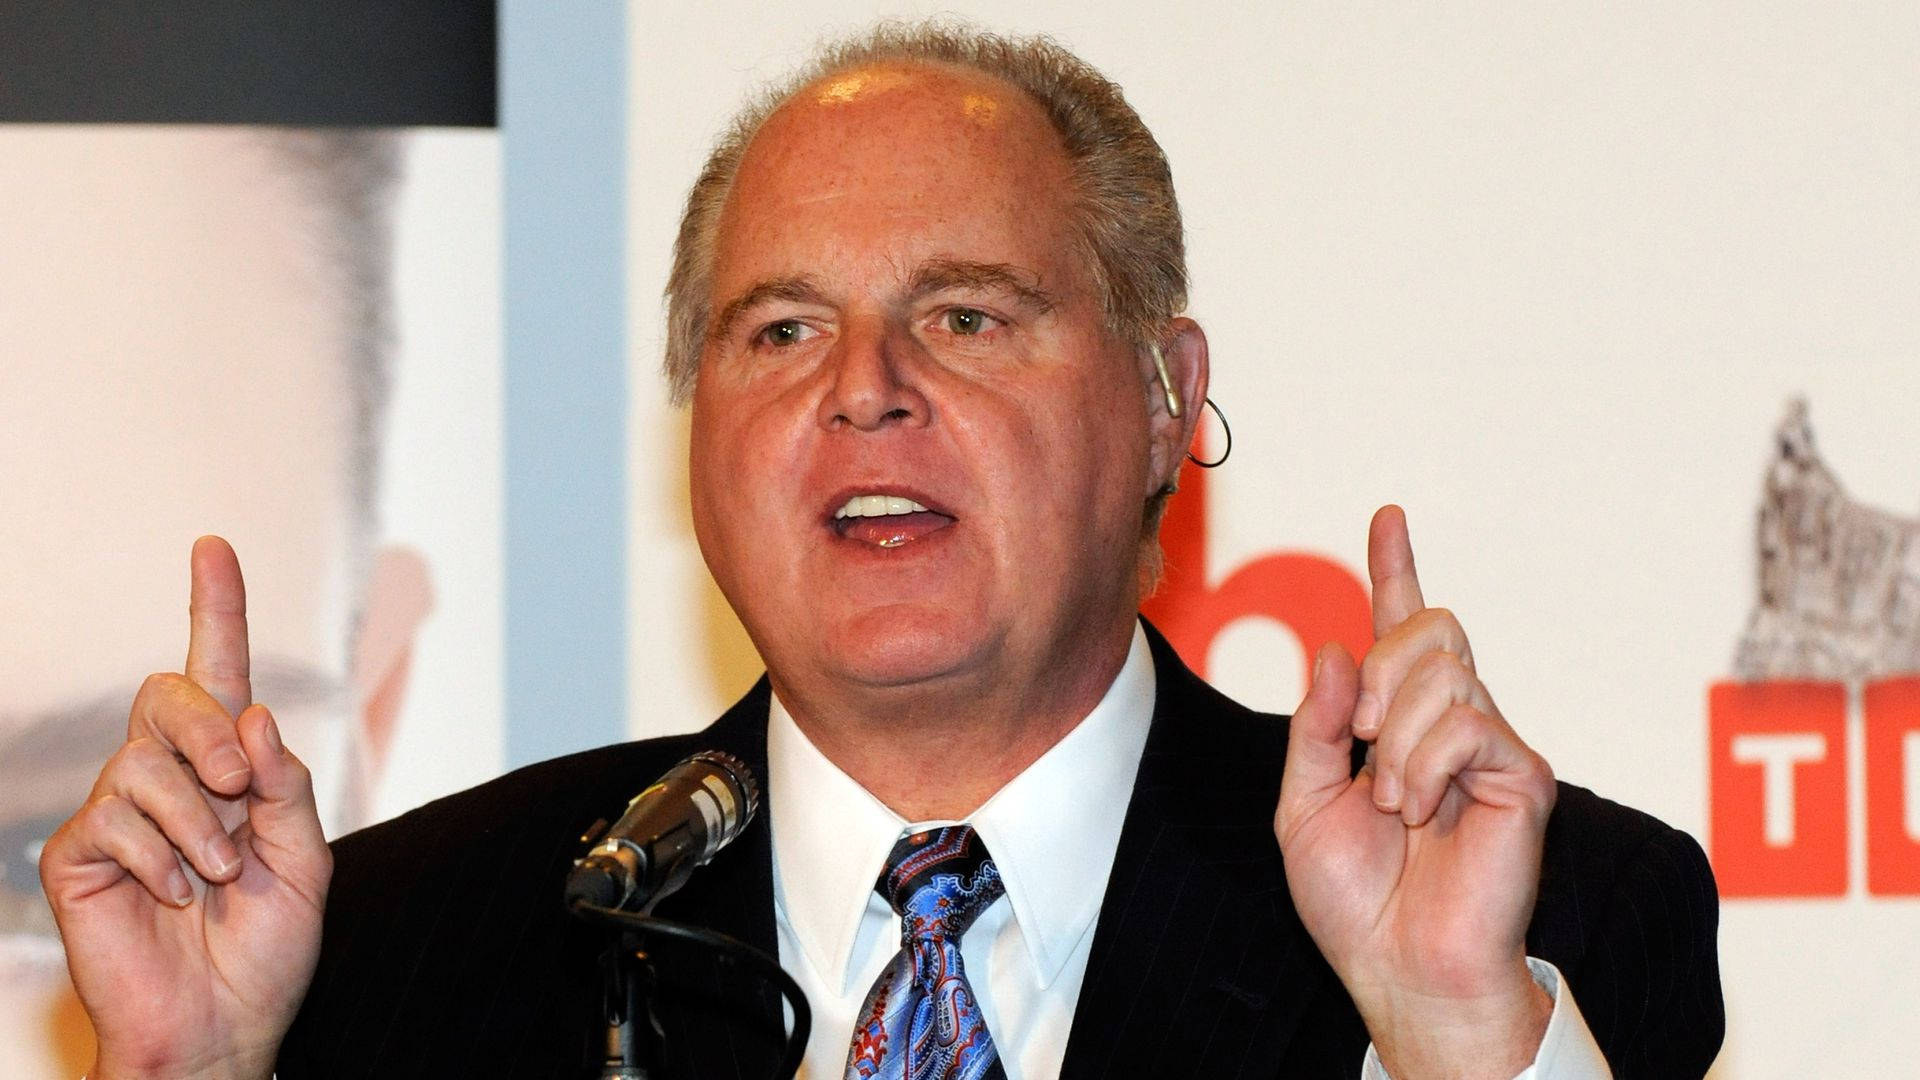 Rush Limbaugh Pageant Conference Background